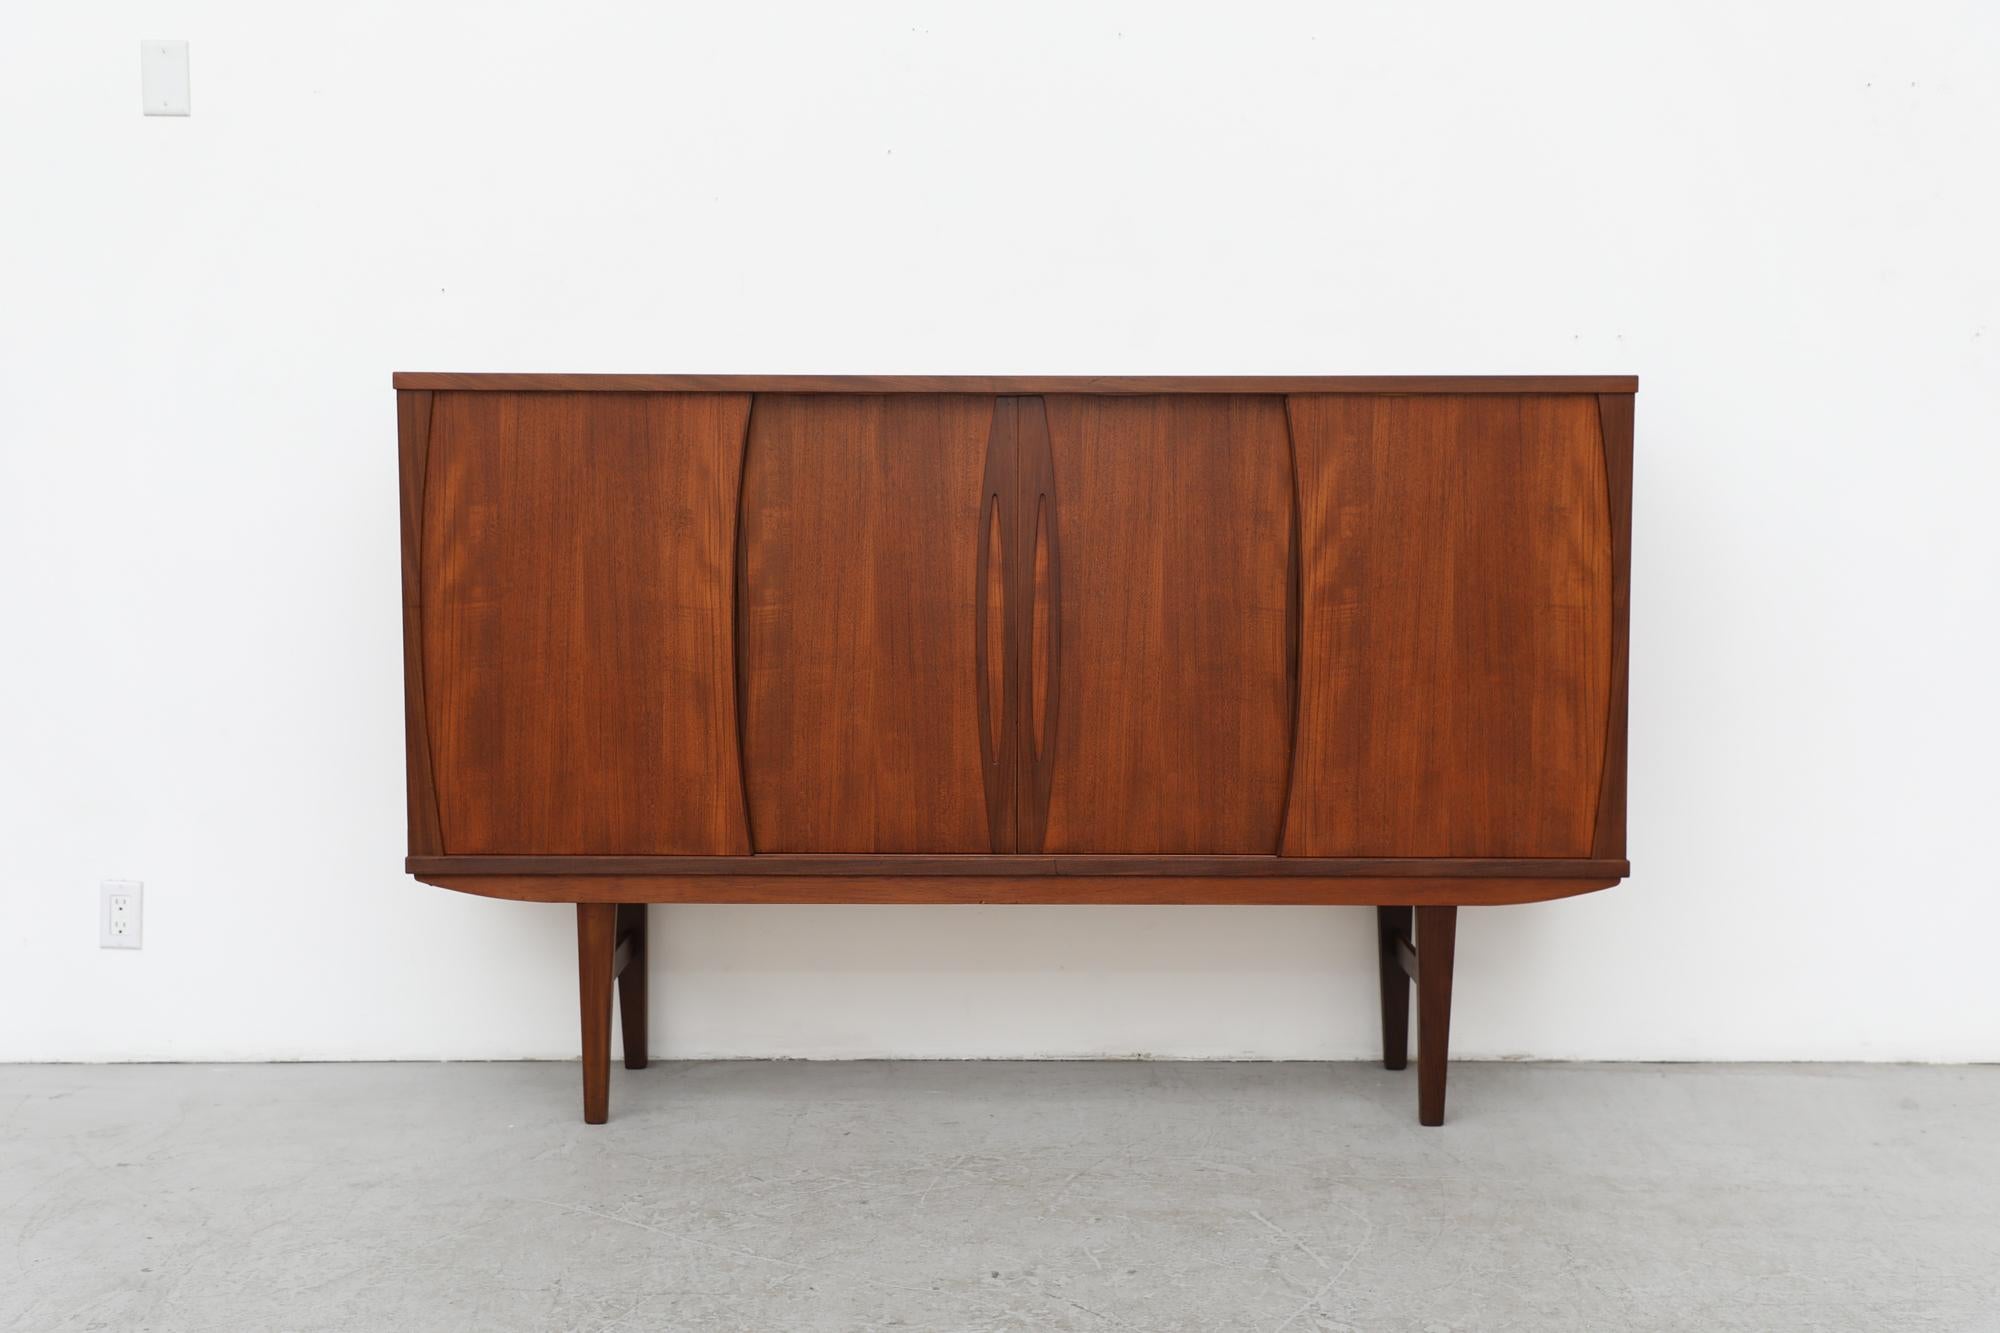 Danish Midcentury tall, teak sideboard with sliding doors and rosewood trim that reveal a Rat Pack style bar consisting of a mirror backed bar cubby with a pullout tray and 3 lower drawers. In original condition with a chip on the interior mirror.